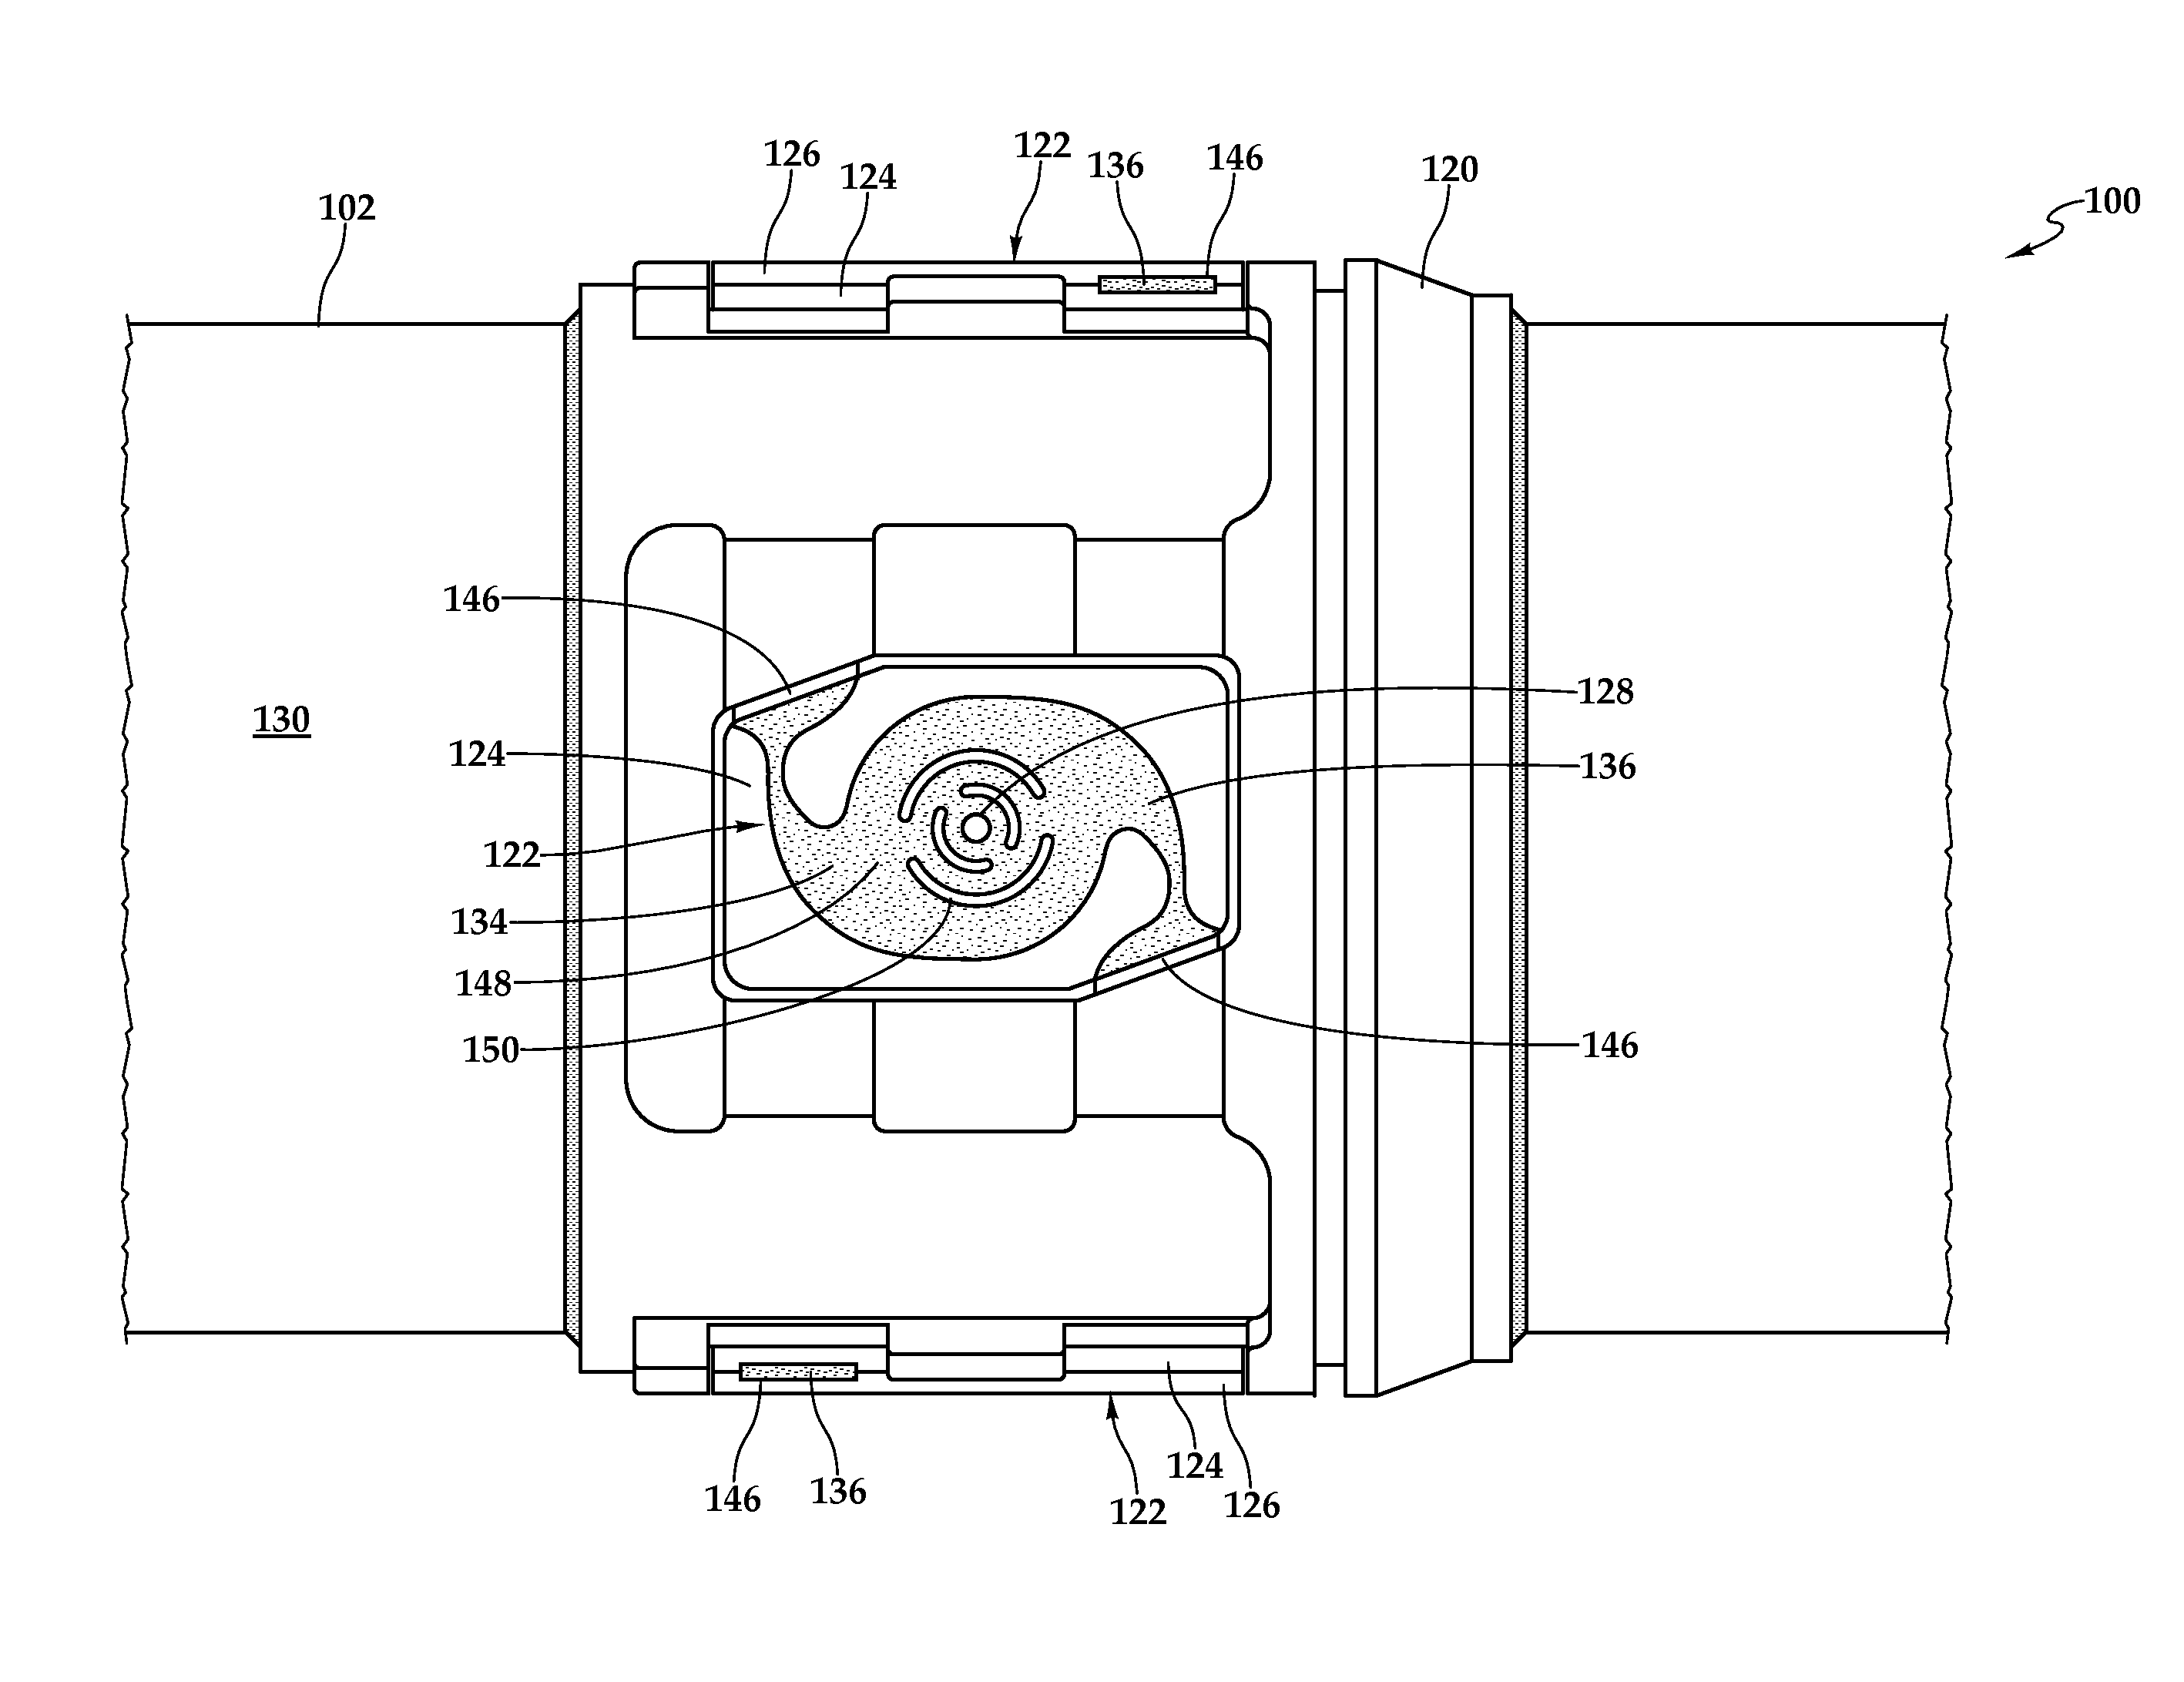 Downhole Fluid Flow Control System Having Temporary Sealing Substance and Method for Use Thereof